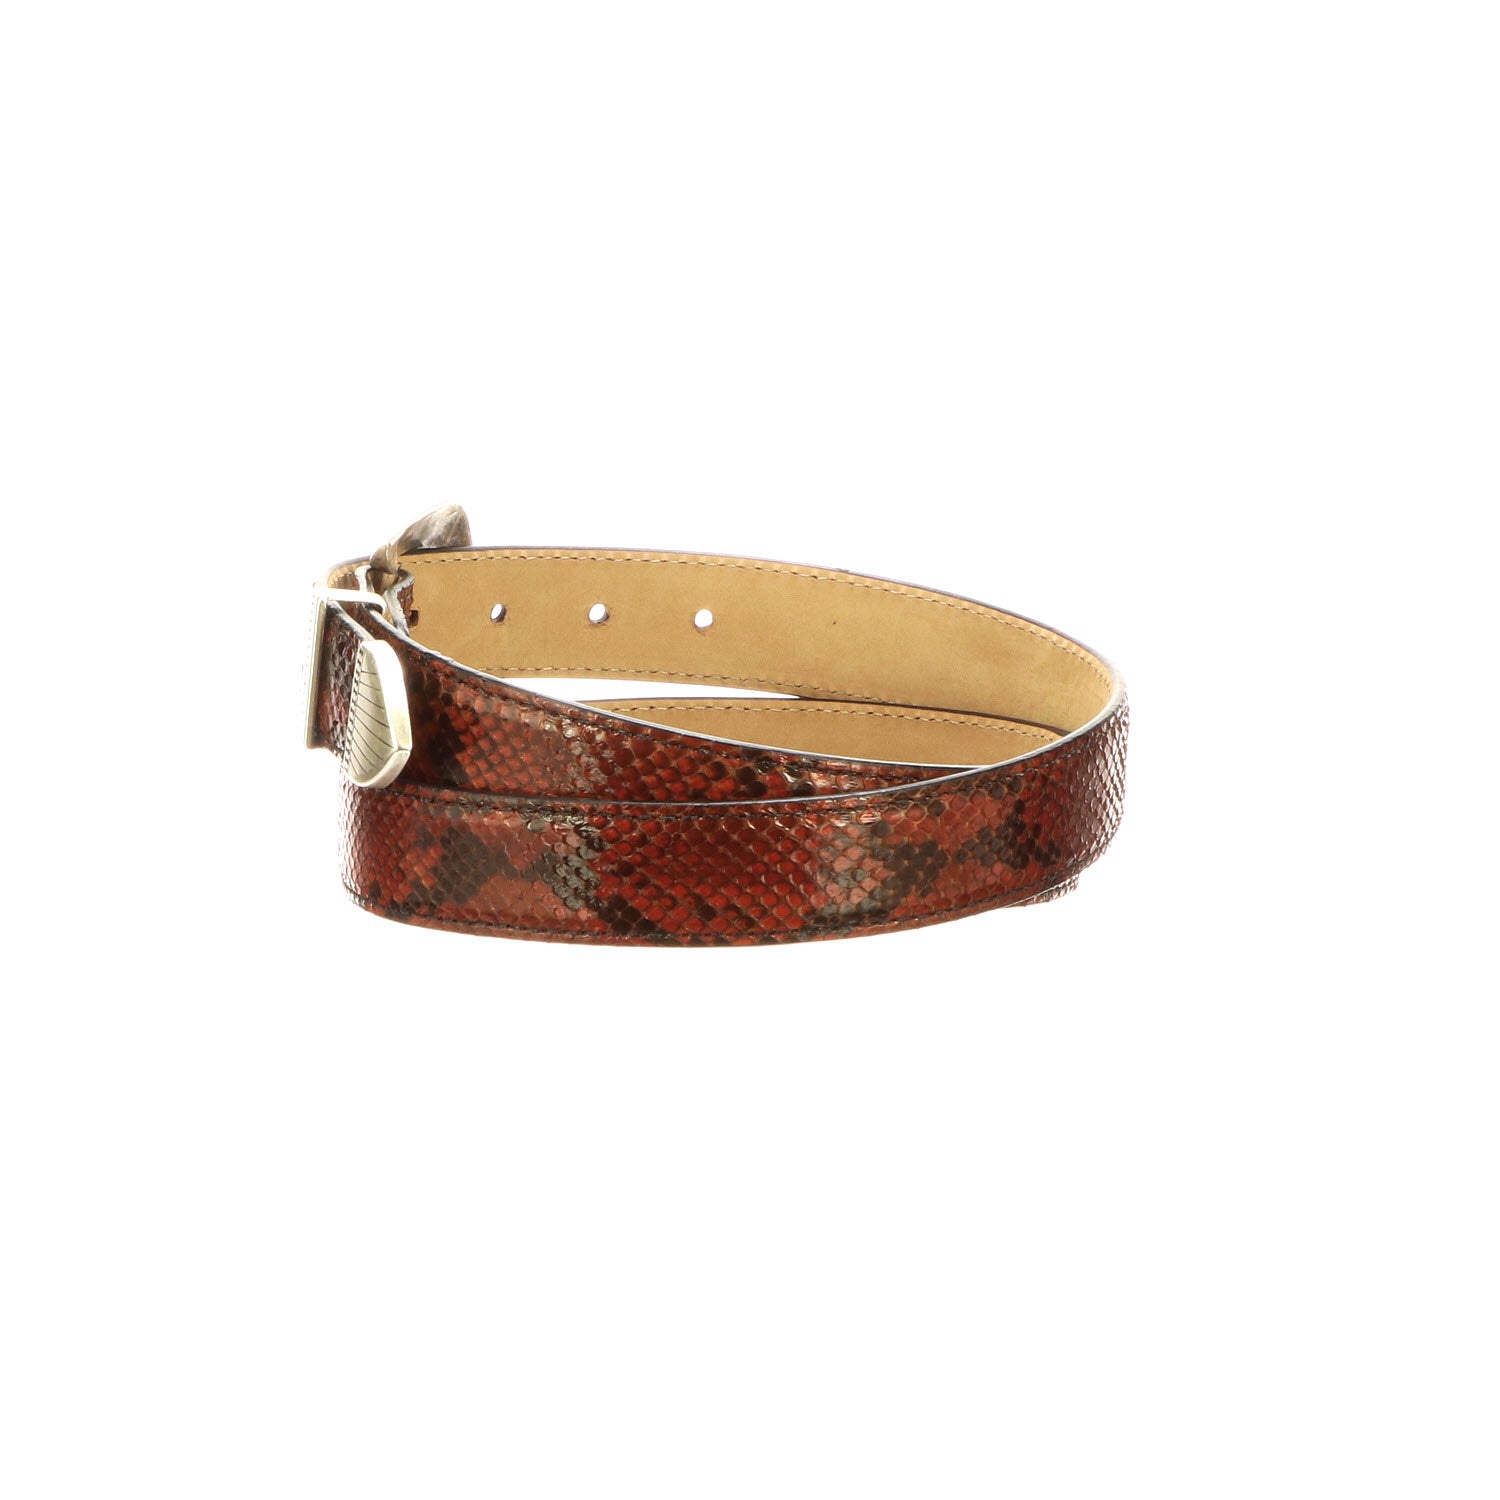 Lv belt in black, darktarn and brown, is 100% lether and is